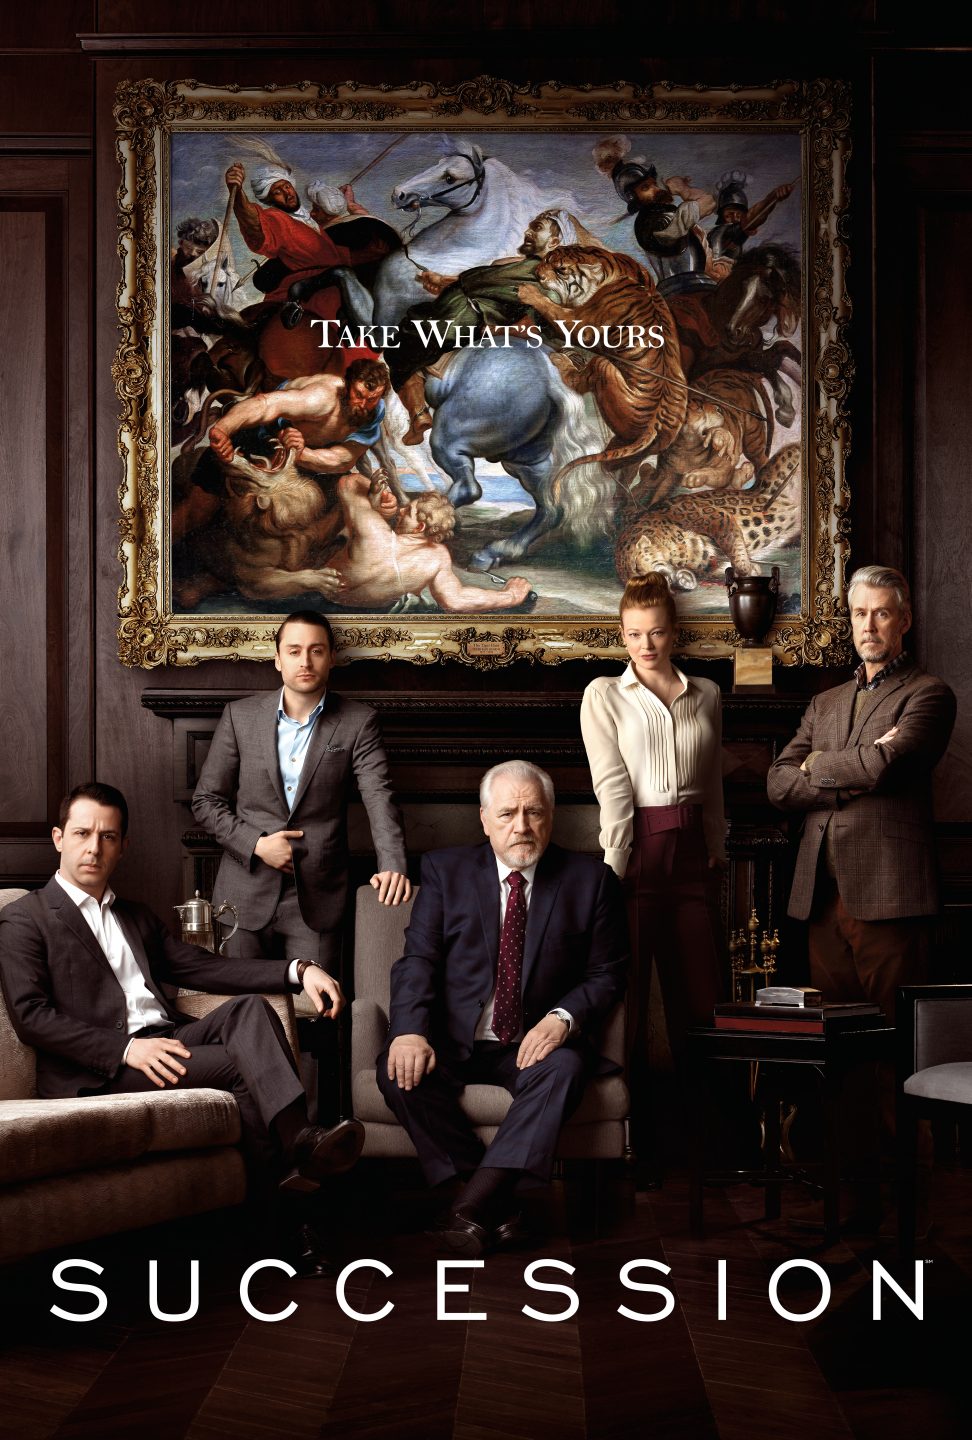 Succession: The Complete First Season art (HBO)